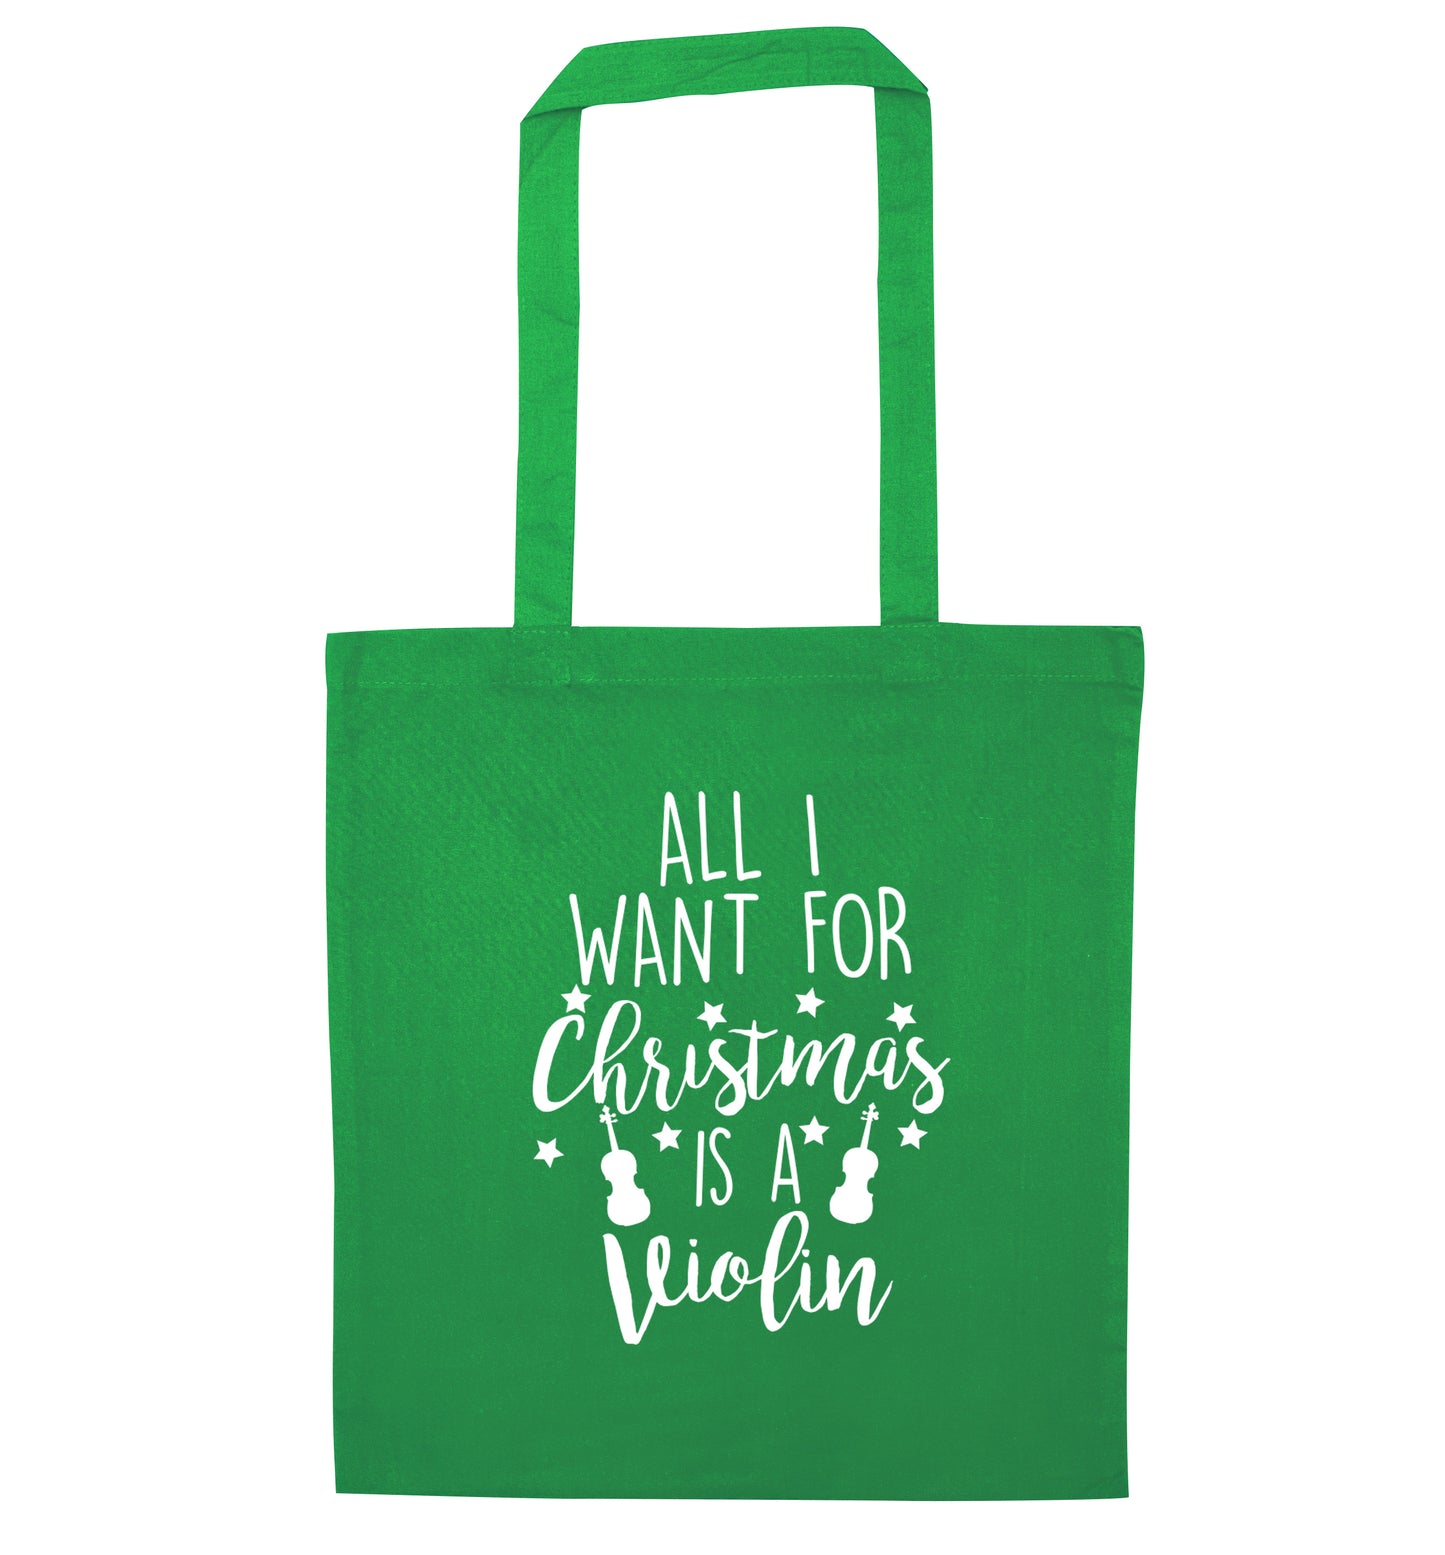 All I Want For Christmas is a Violin green tote bag